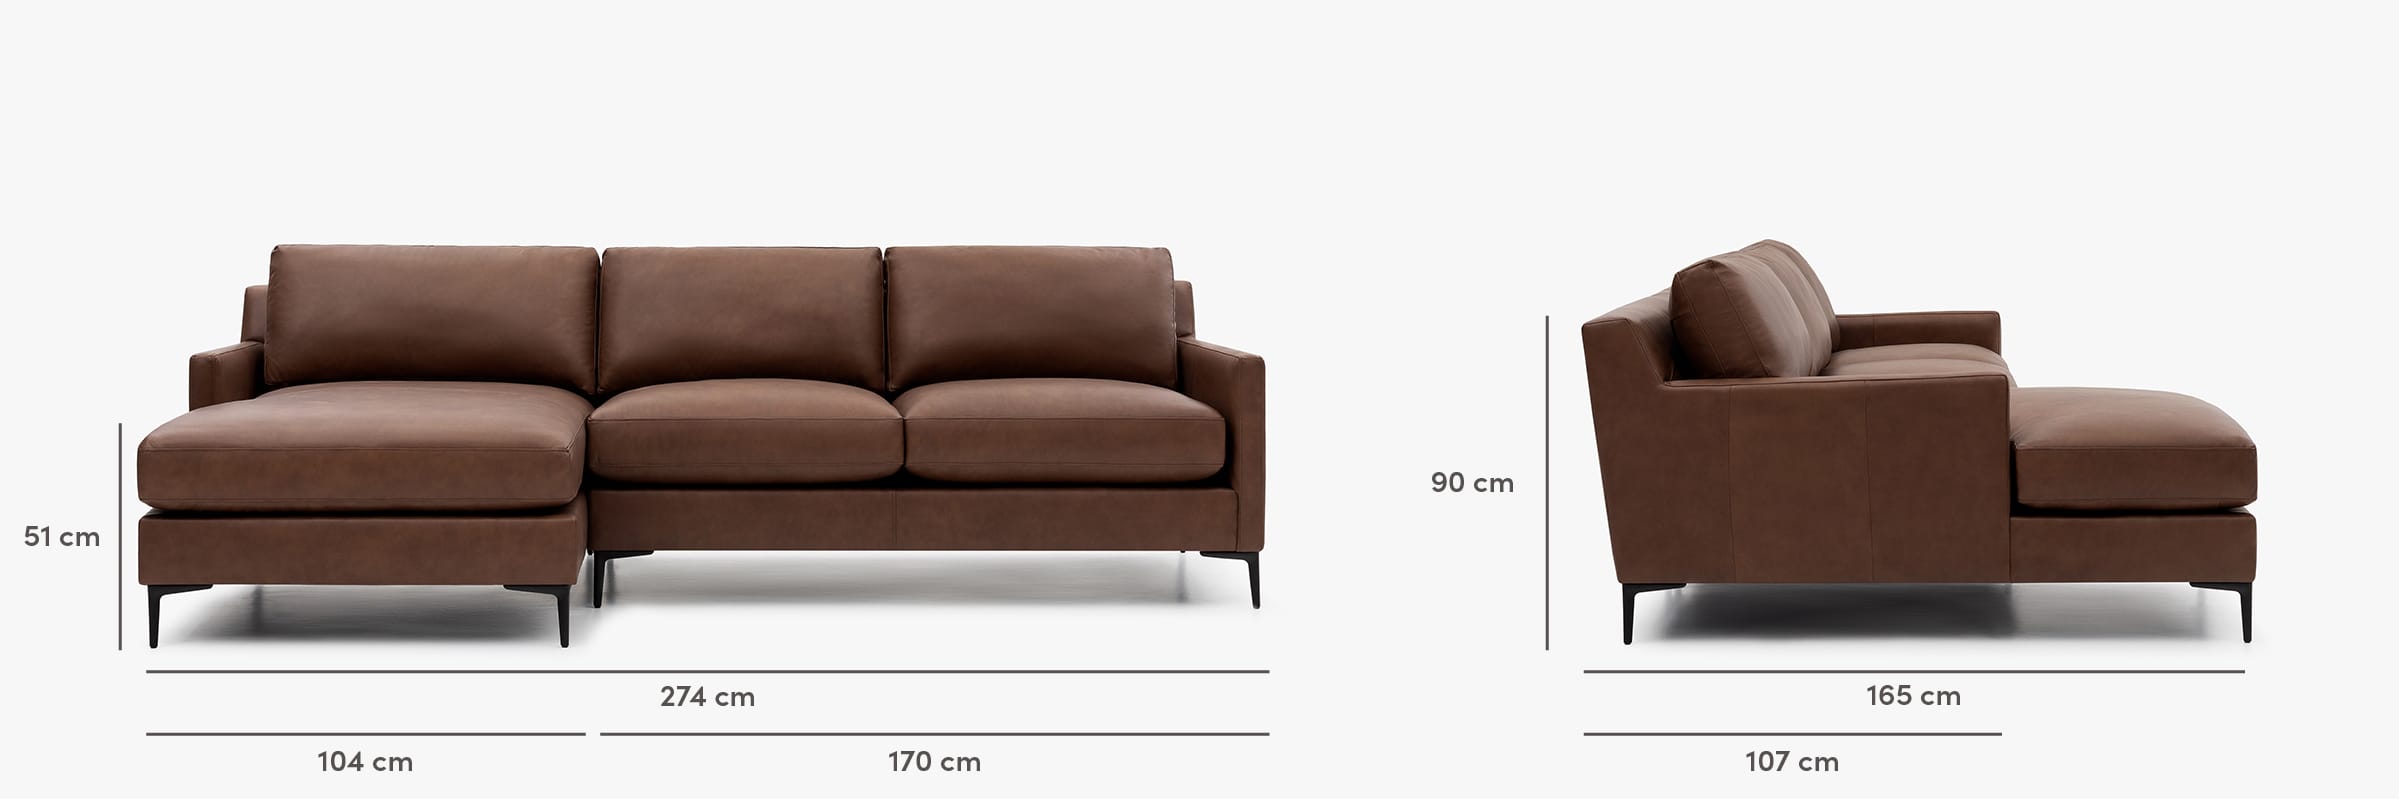 Kennedy sectional leather dimensions